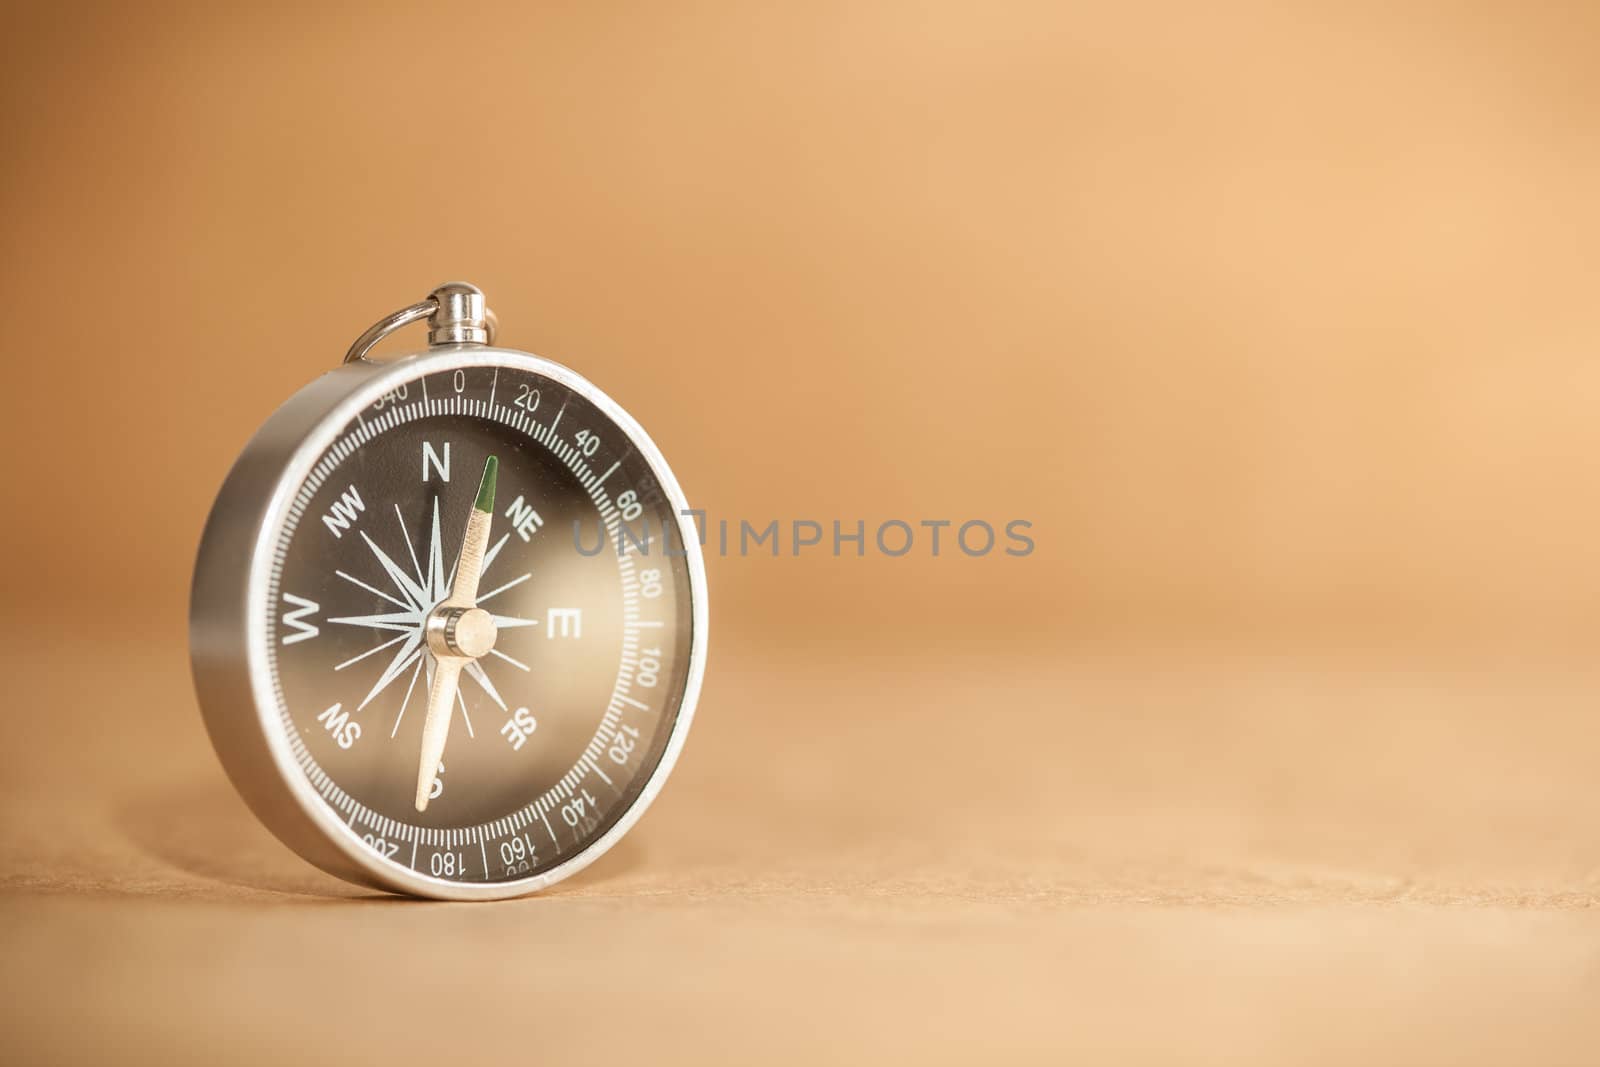 A silver compass with black face pointing north on a brown paper background.